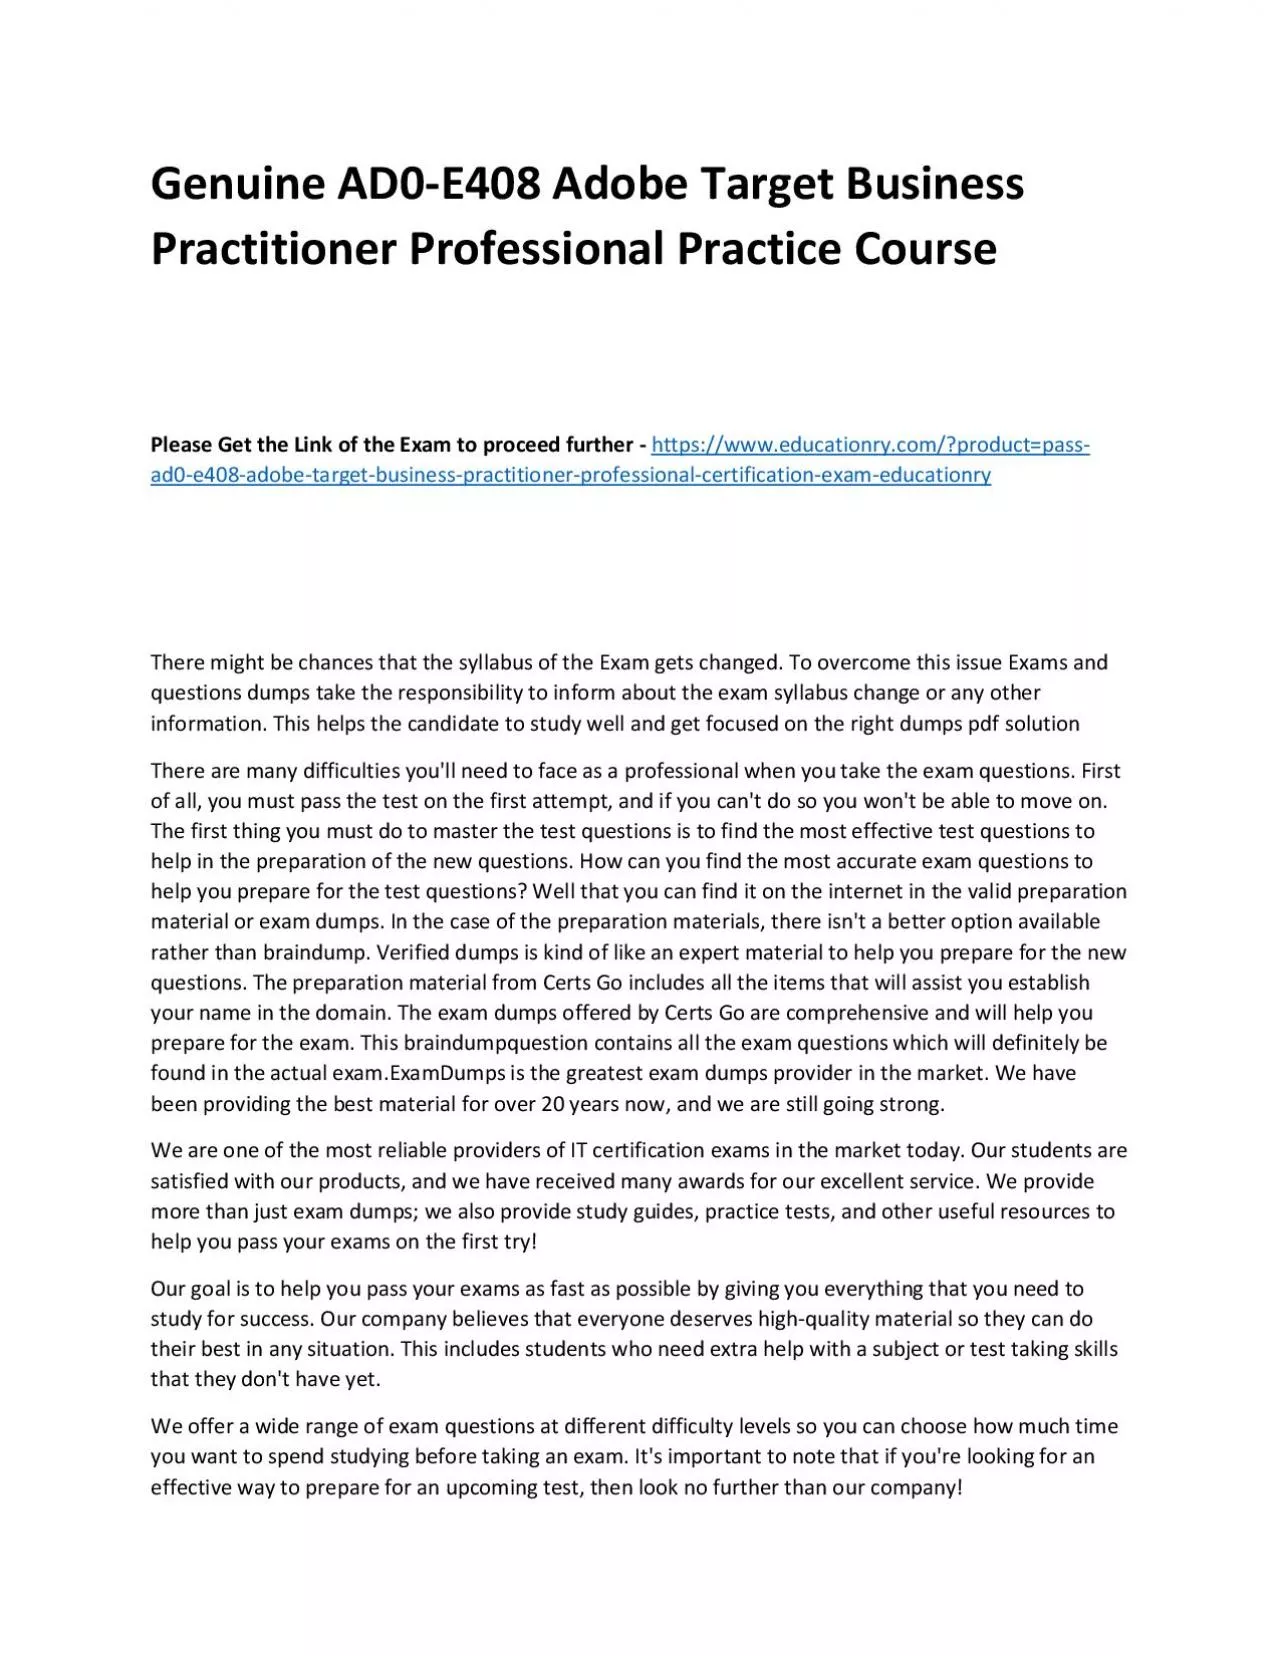 Genuine AD0-E408 Adobe Target Business Practitioner Professional Practice Course